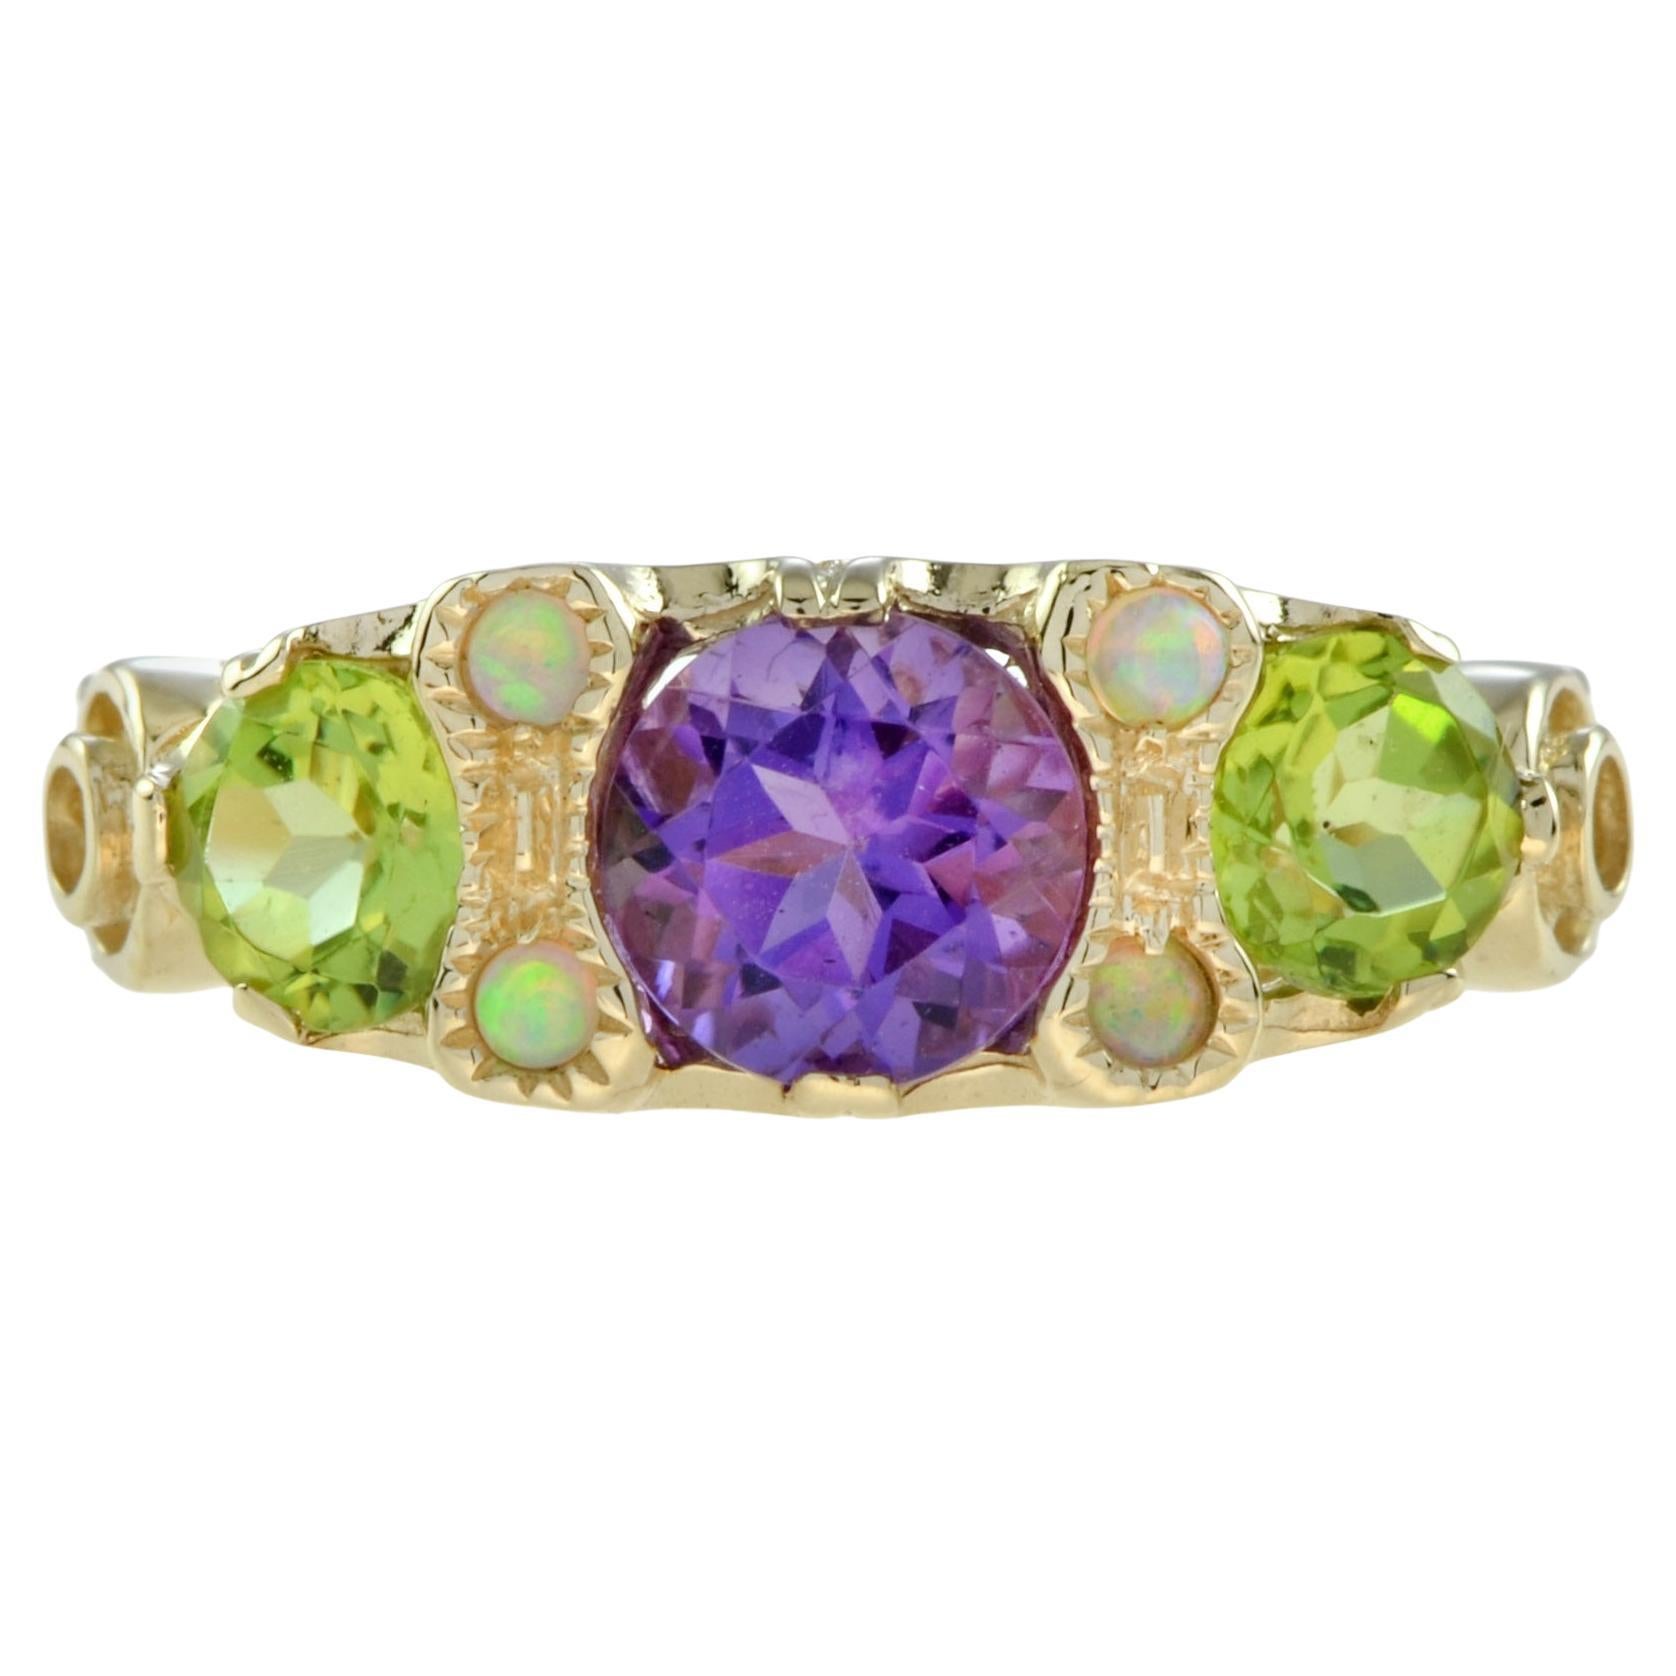 Amethyst Peridot and Opal Three Stone Ring in 14K Yellow Gold